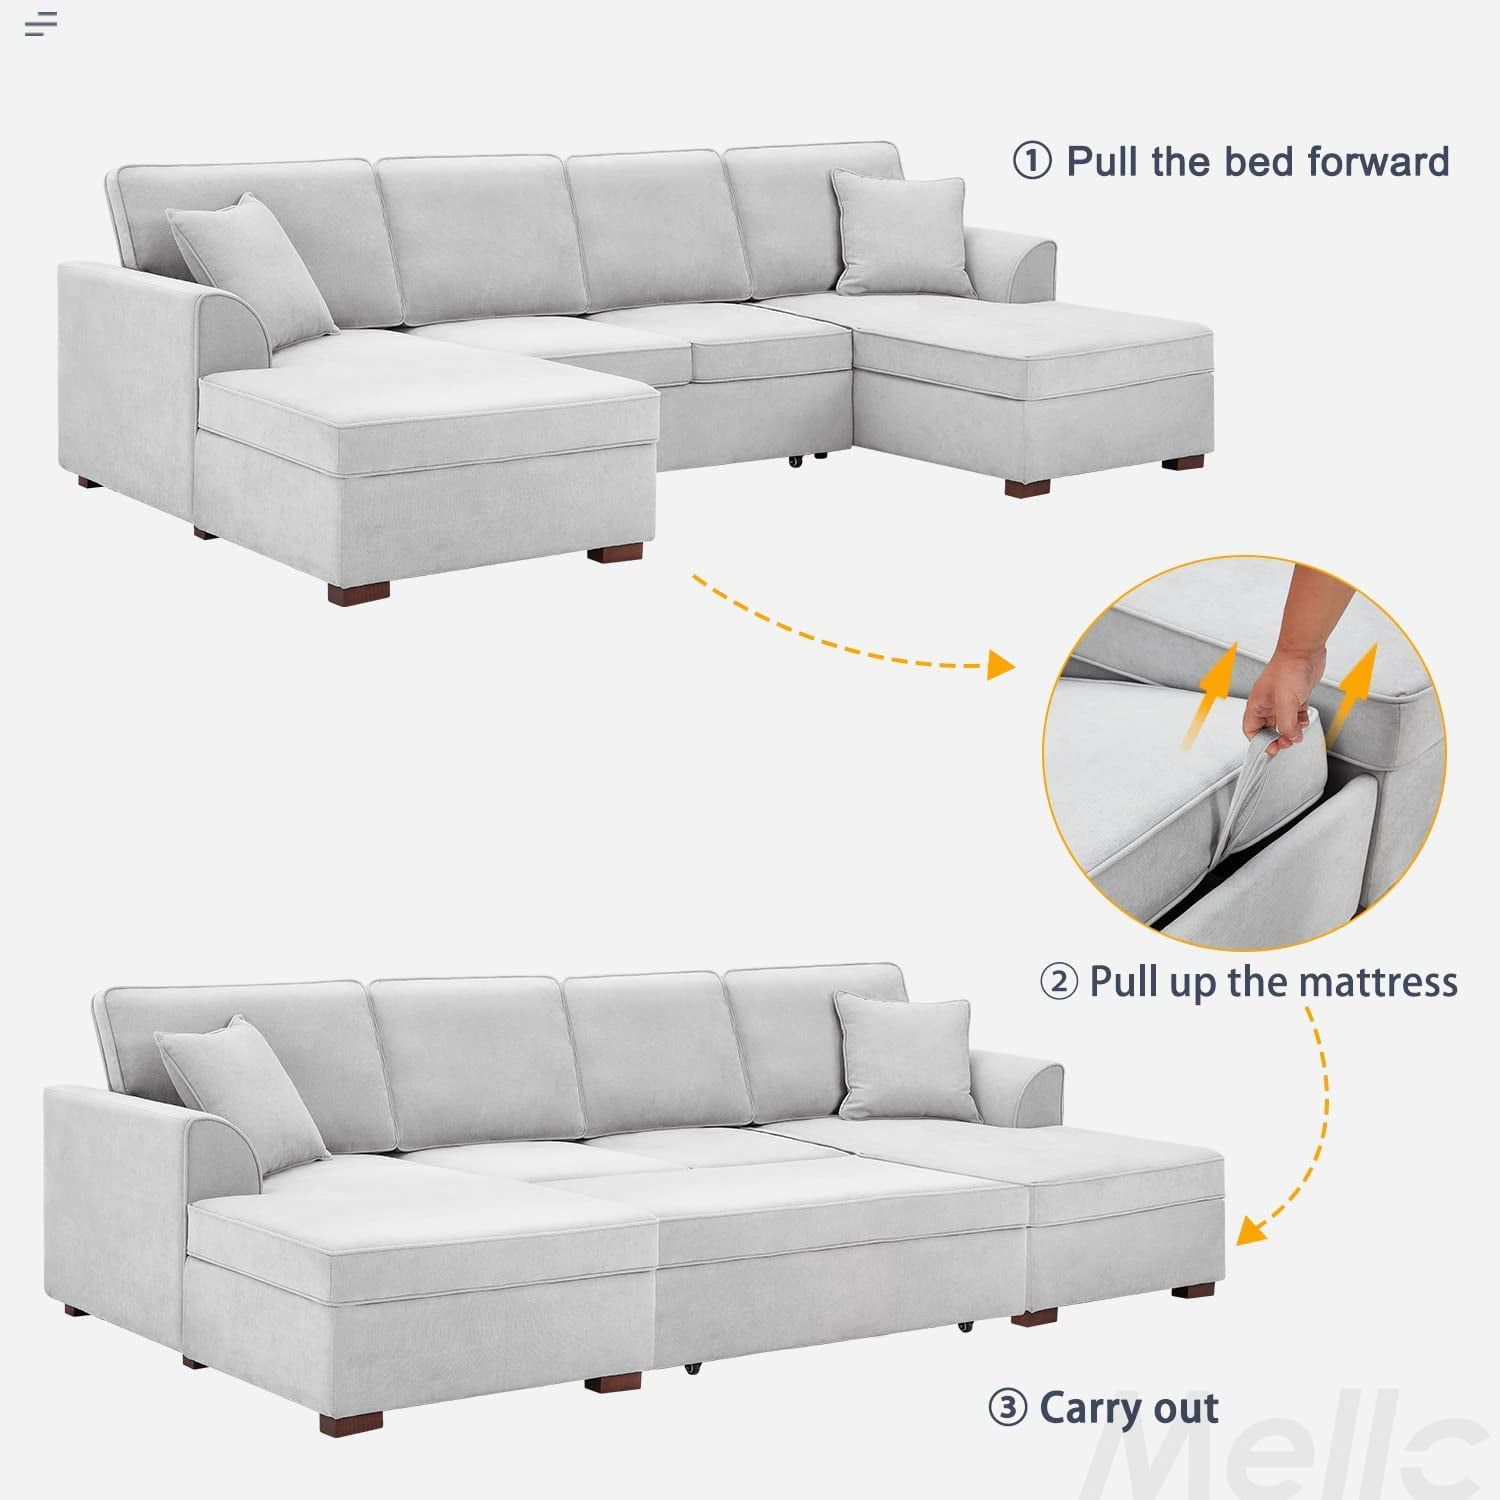 Mellcom U Shaped Sectional Sofa With Pull Out Bed, Upholstered Modular Couch  With Storage, Gray – Walmart In U Shaped Sectional Sofa With Pull Out Bed (Gallery 11 of 20)